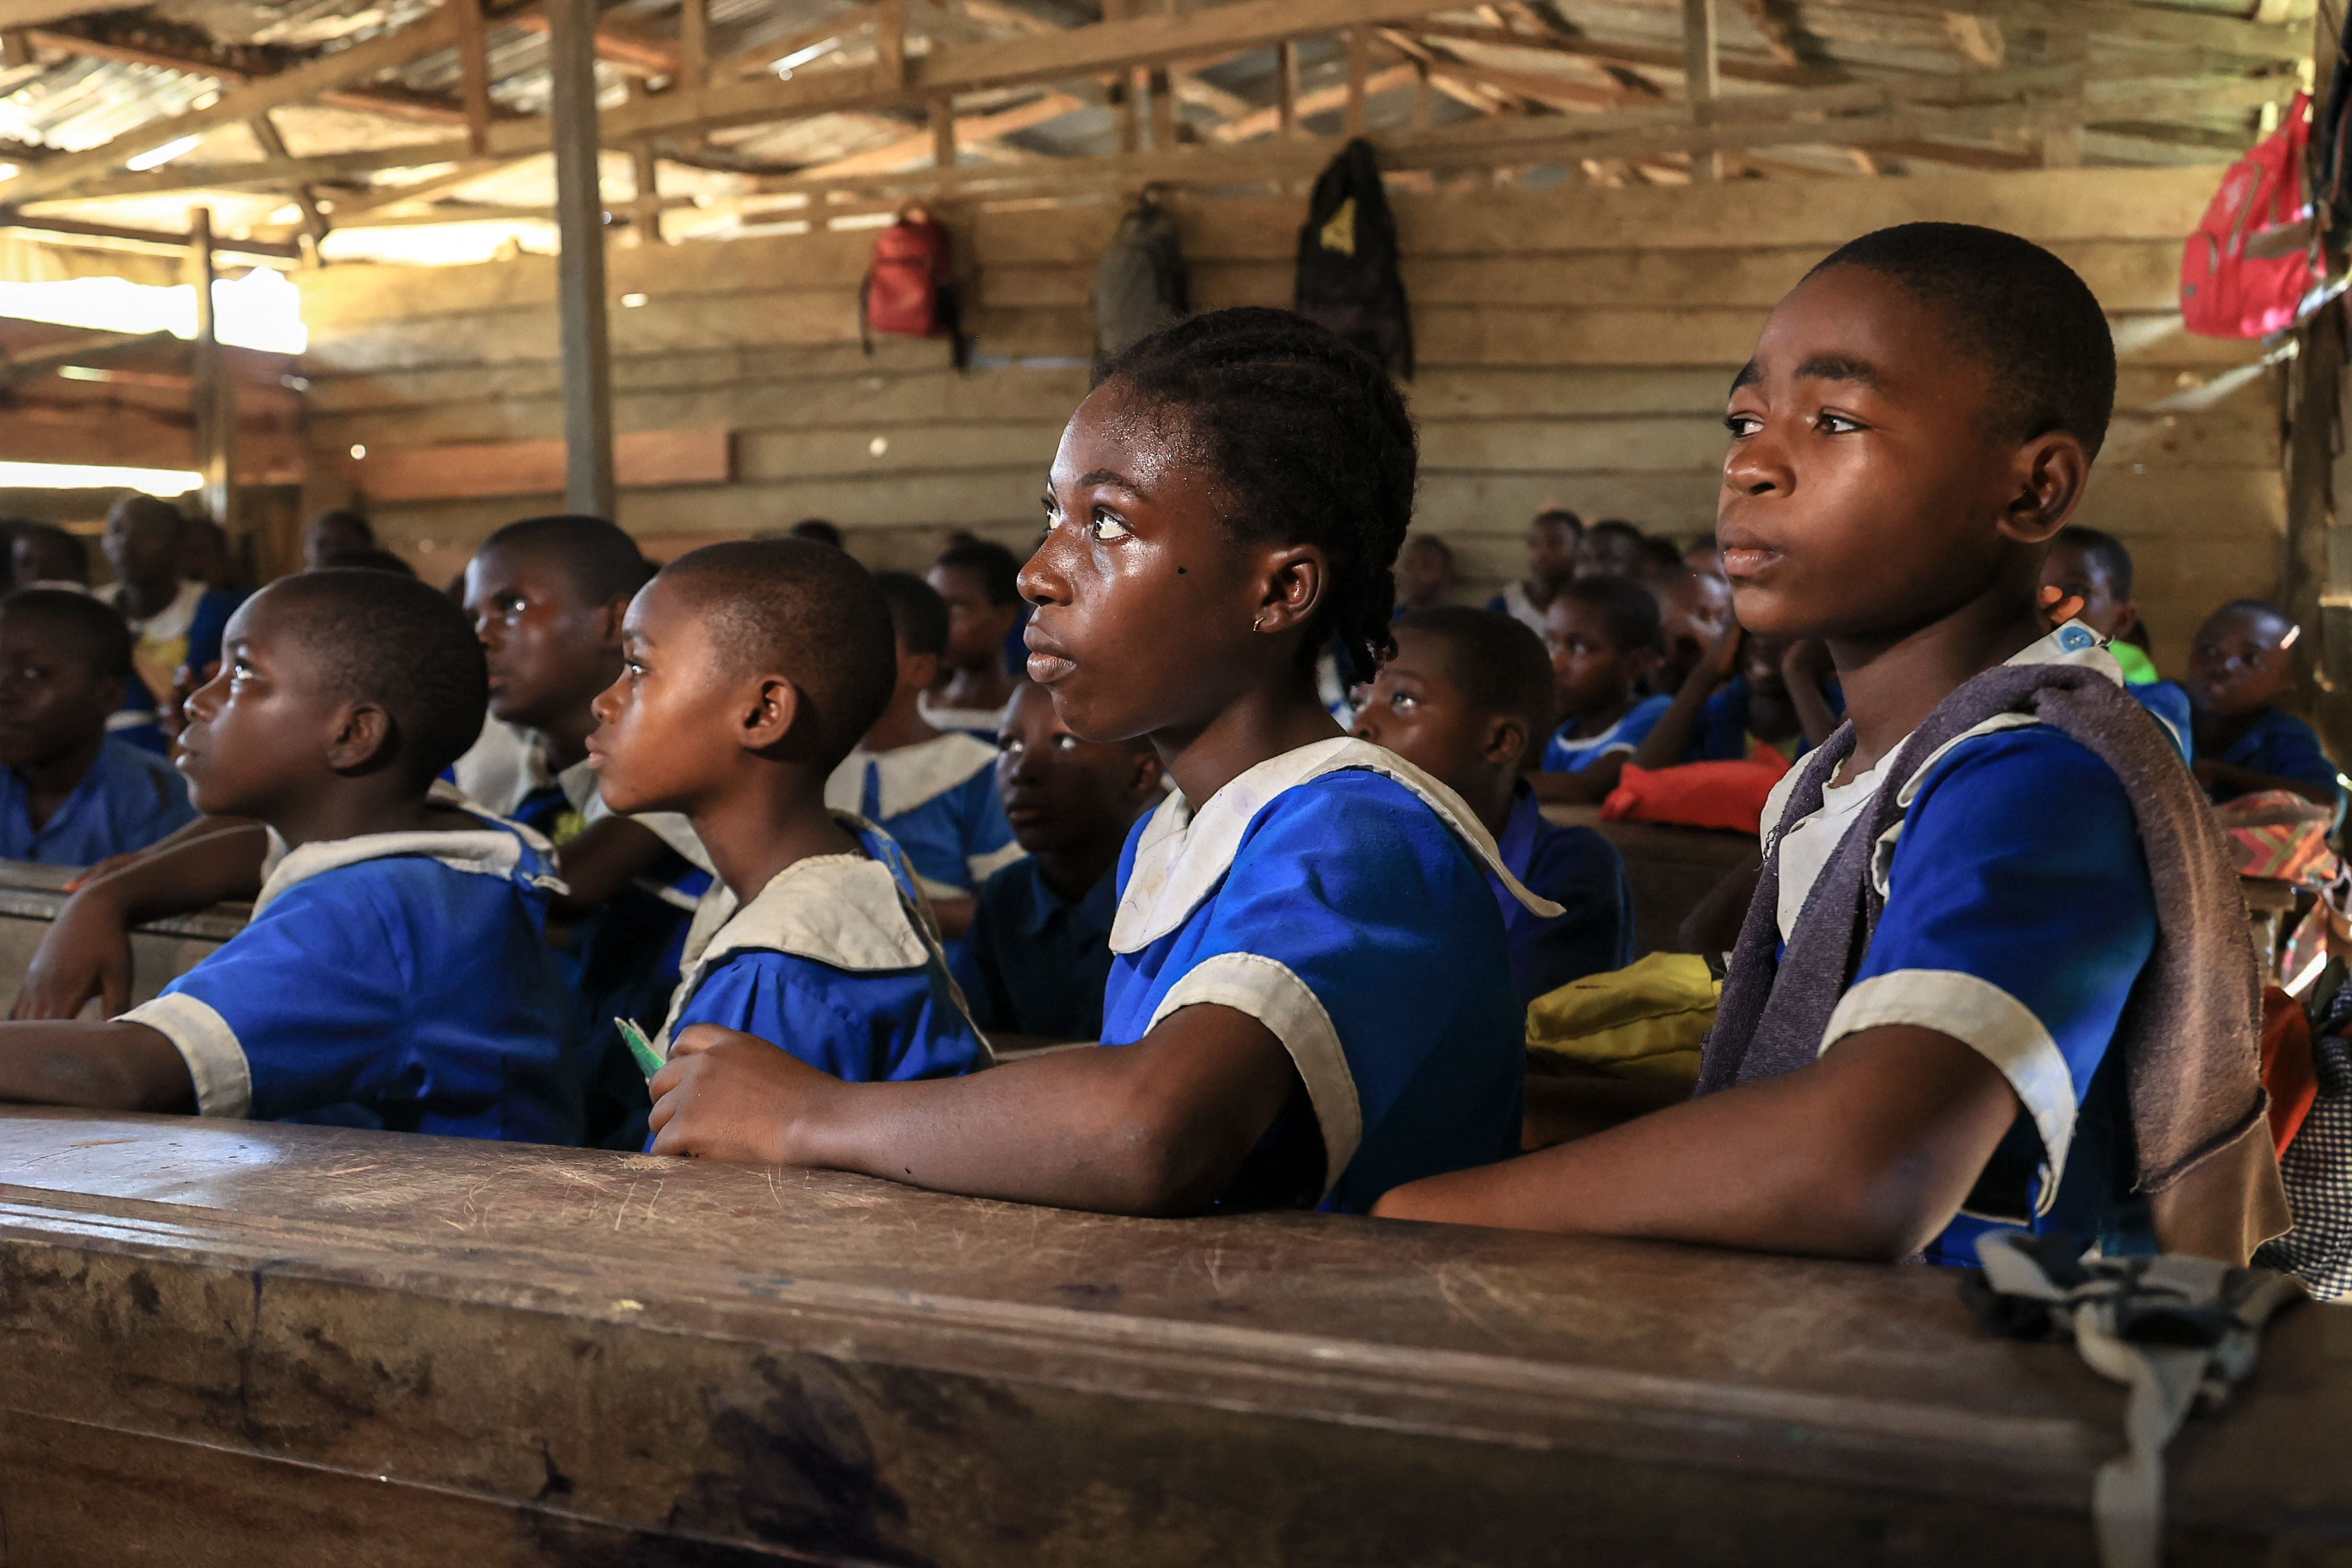 File photo: Students are seen in a classroom at a school in Souza, Cameroon, on 1 December, 2021